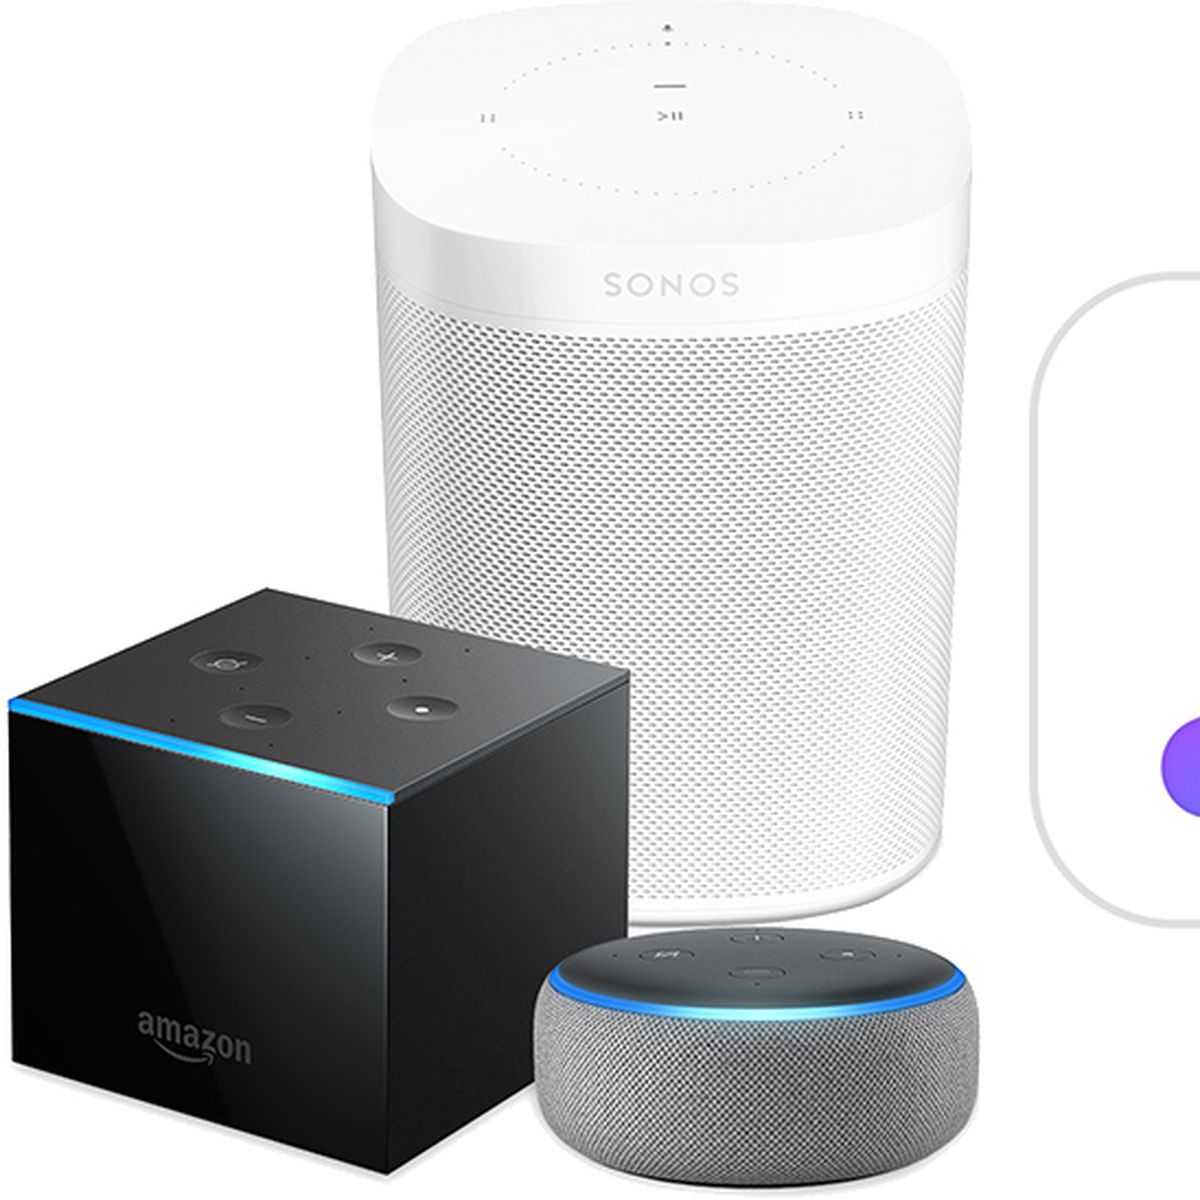 Alexa Now Apple Music in Australia and New Zealand on Echo, Sonos, and TV Devices - MacRumors